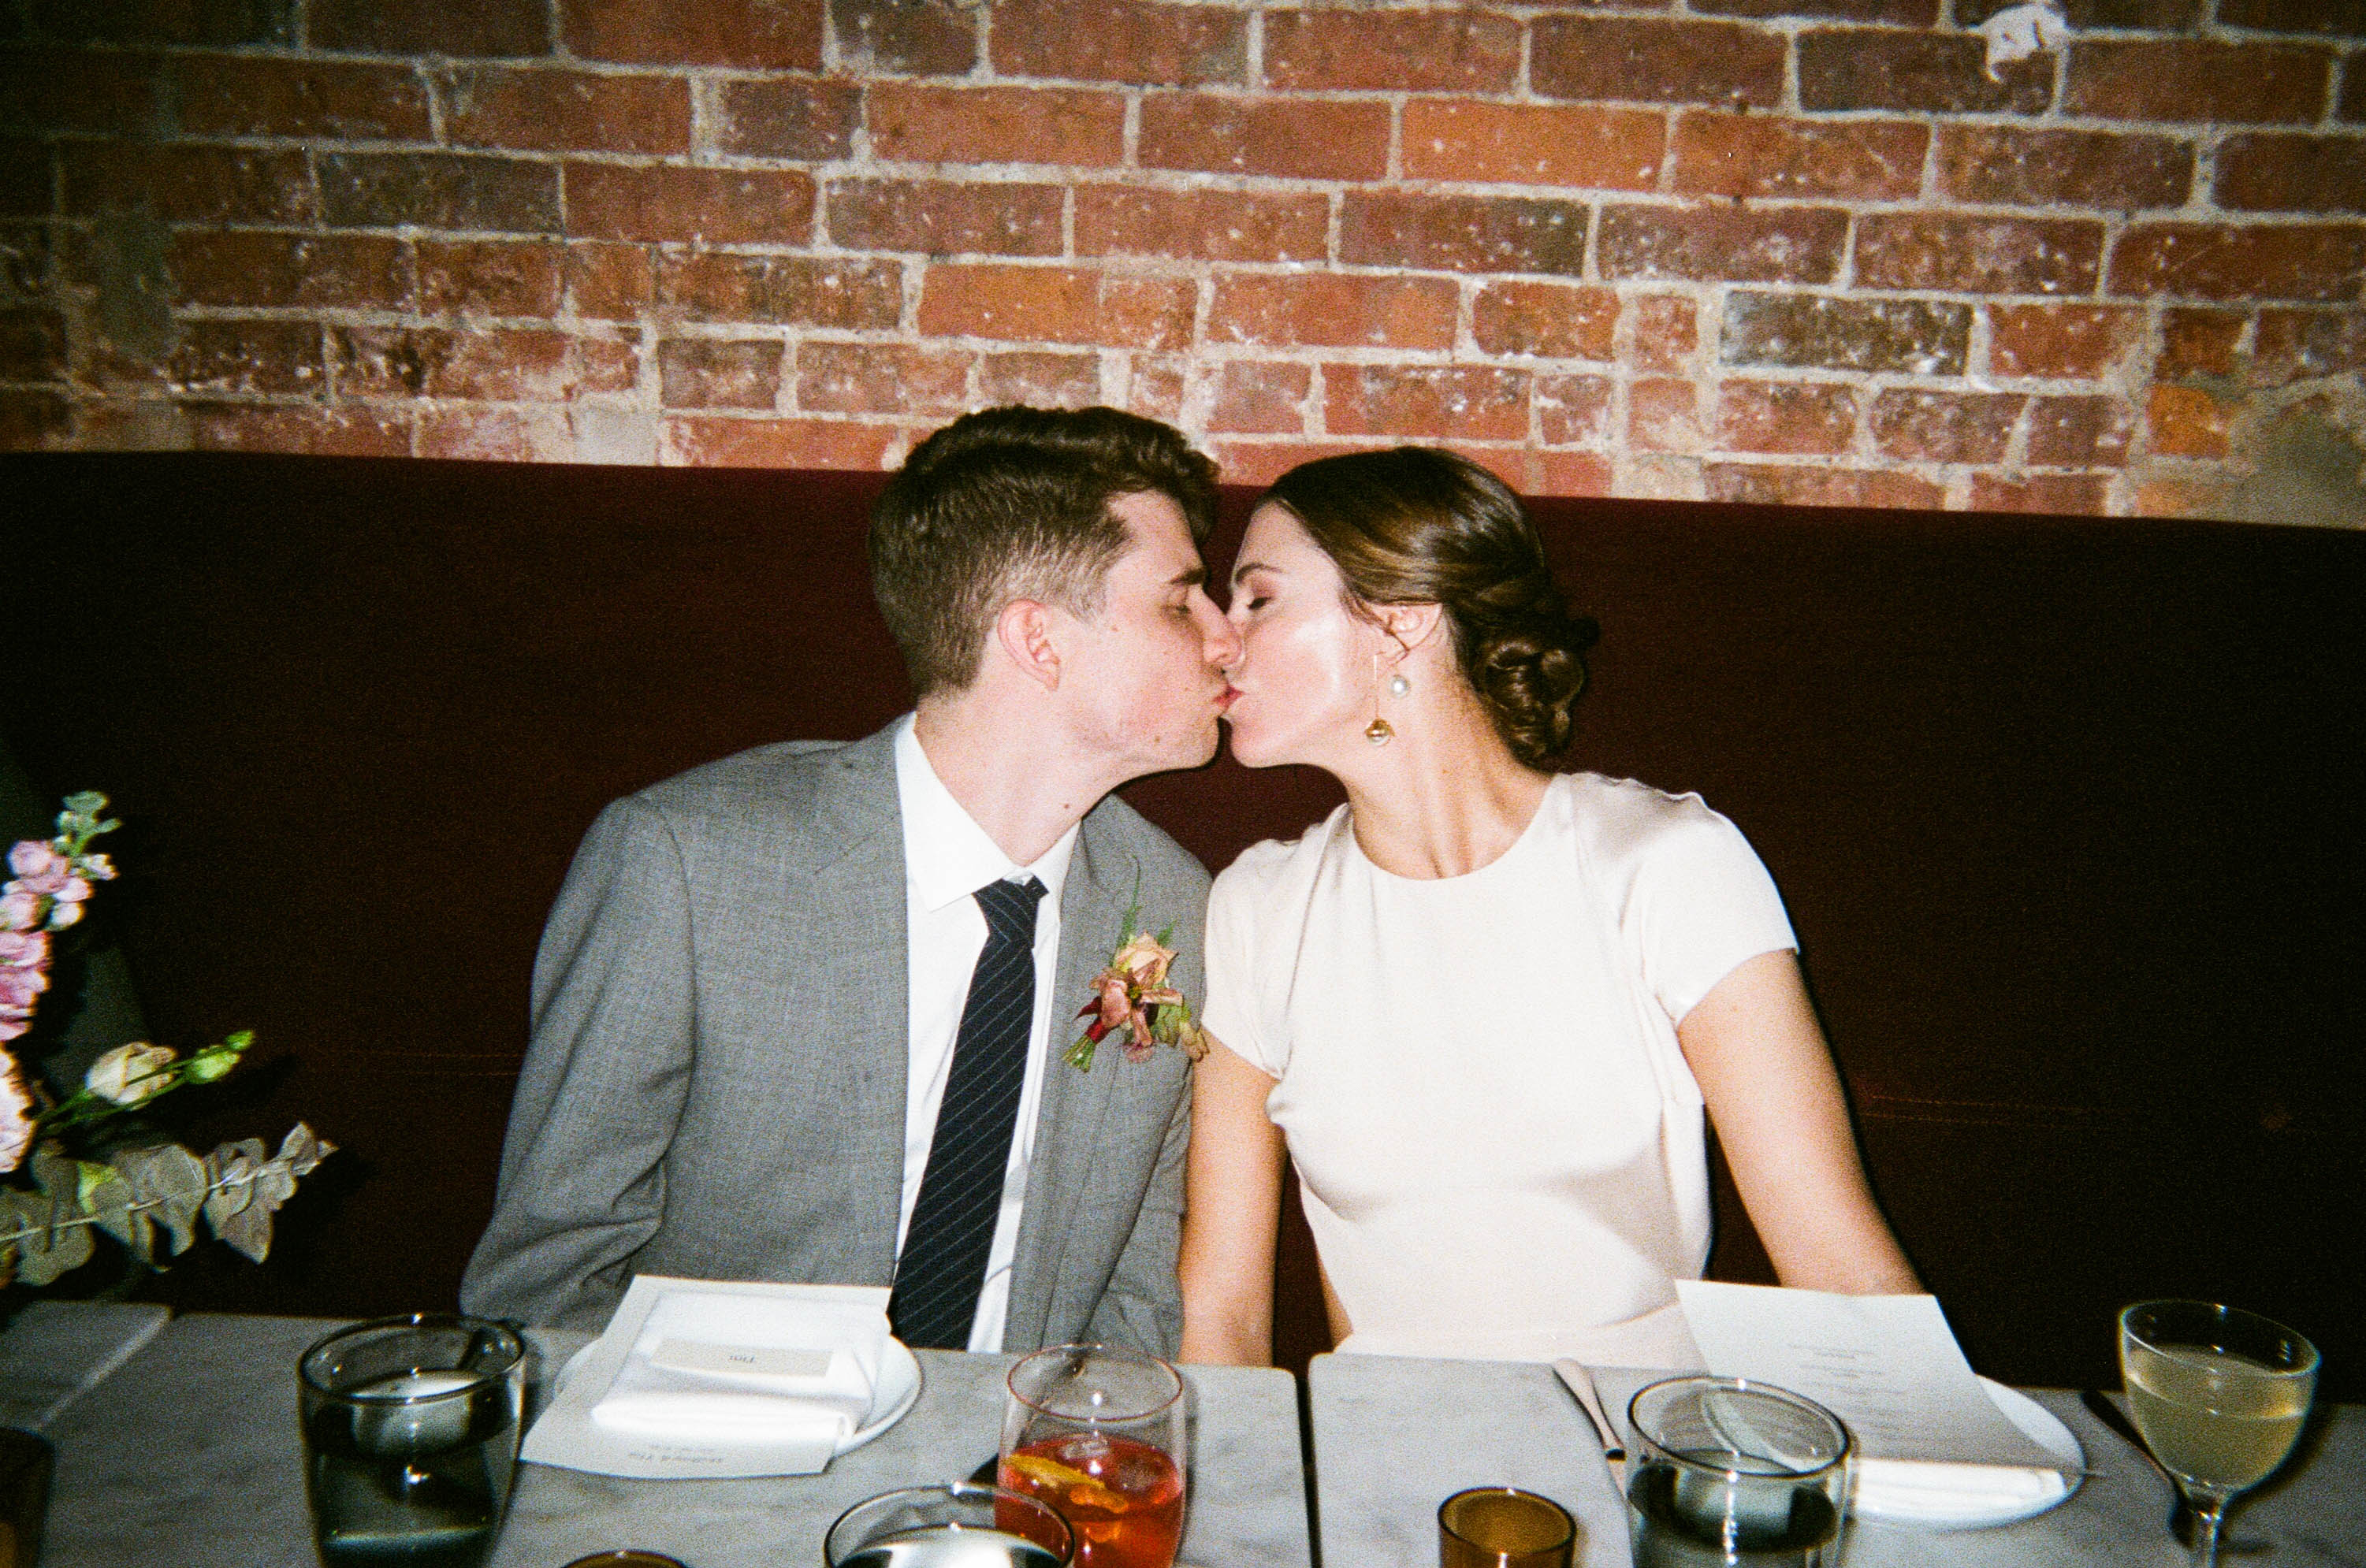 a bride and groom kissing at their wedding reception